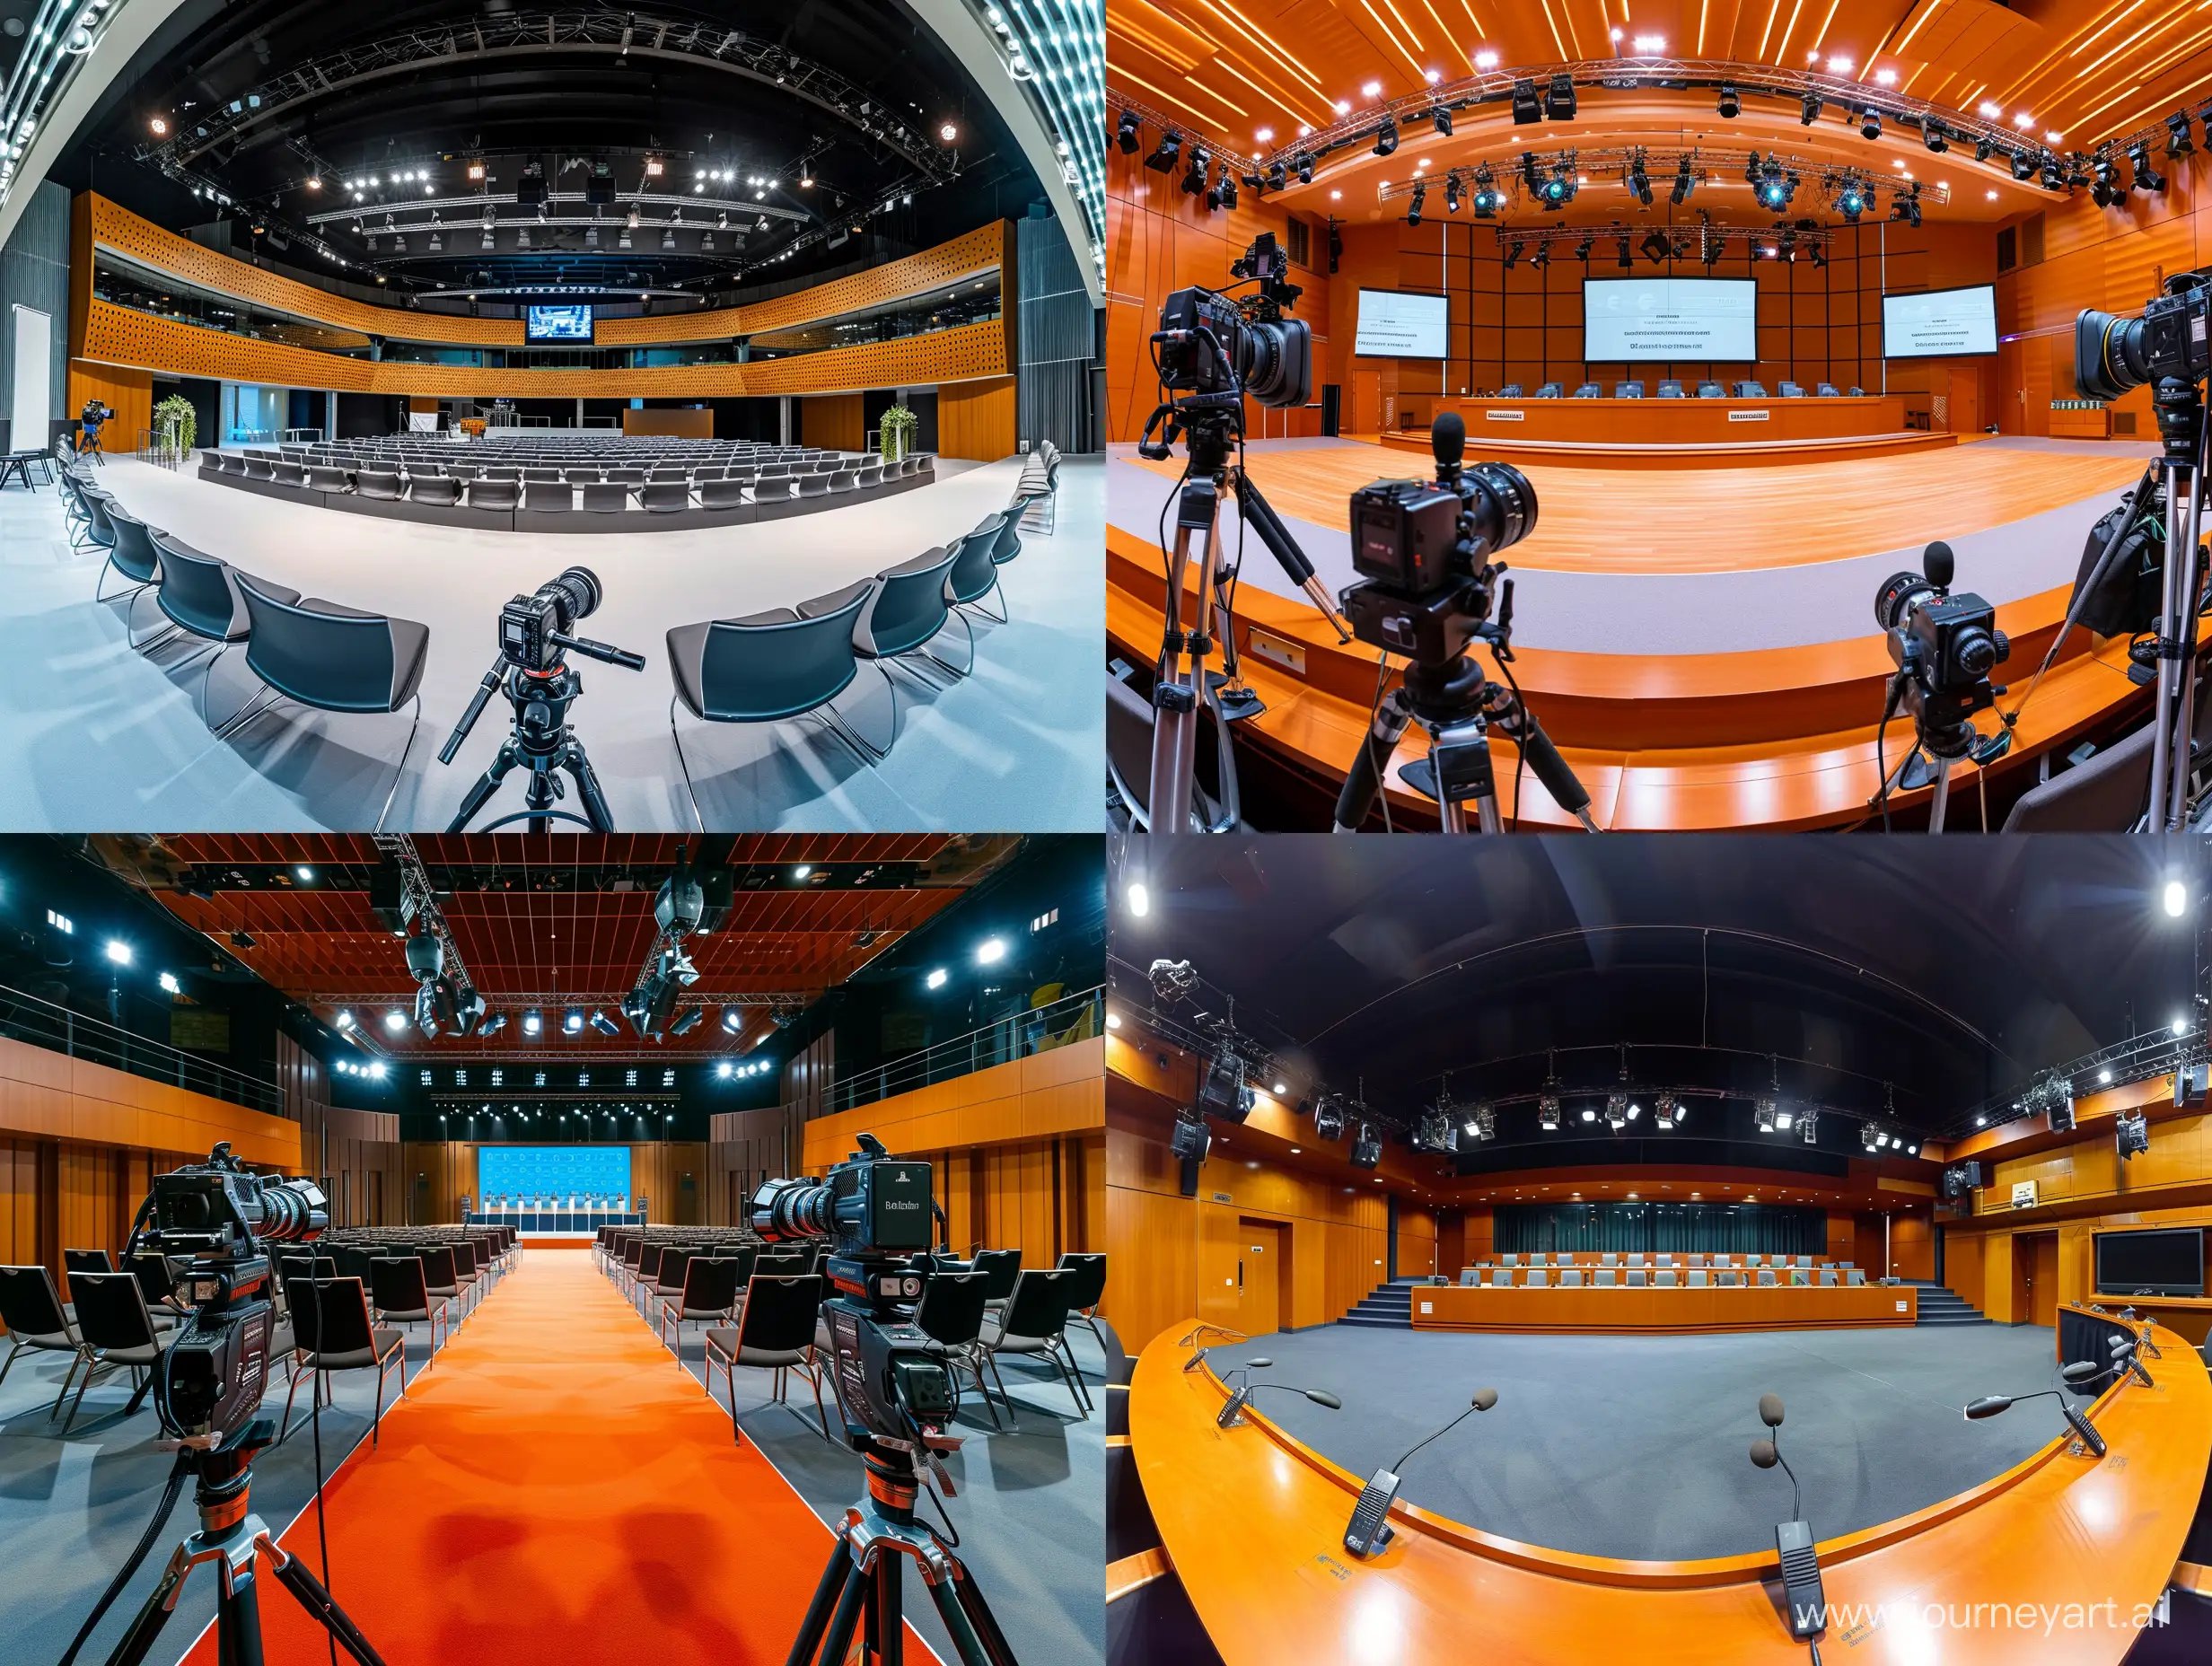 Frontal shot of the press conference hall panorama, highest quality, a masterpiece of photography.